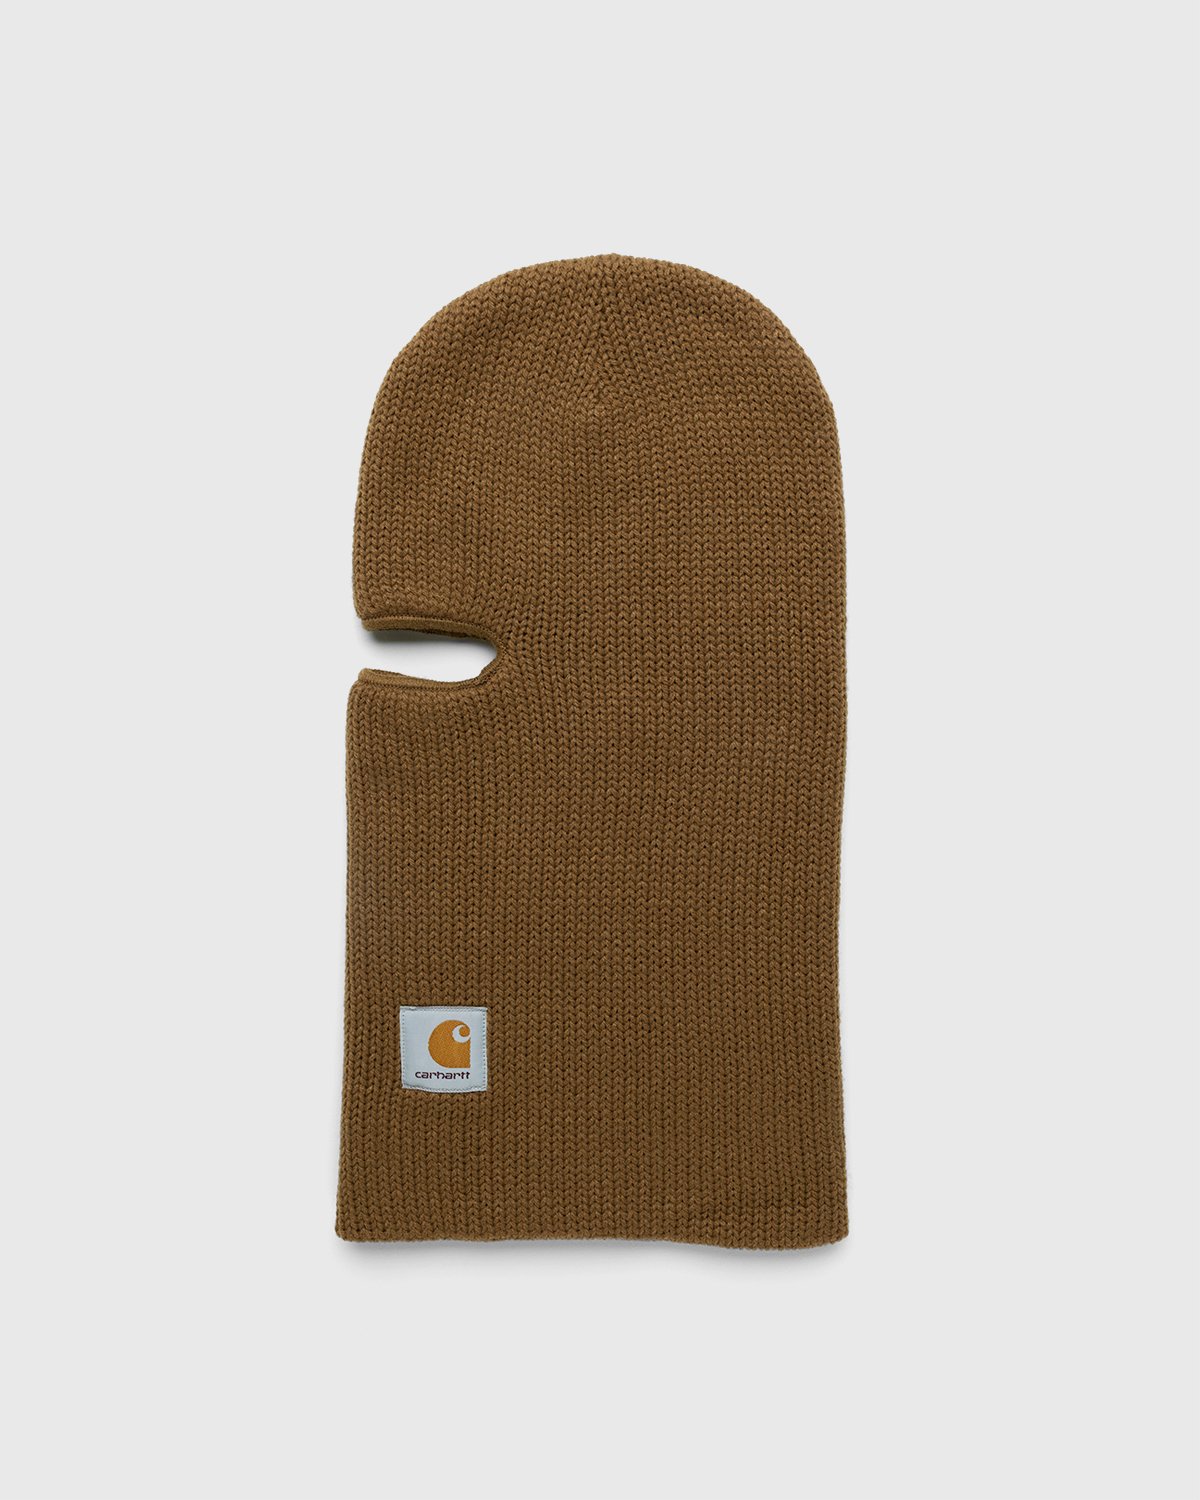 Carhartt WIP - Storm Mask Hamilton Brown - Accessories - Brown - Image 5